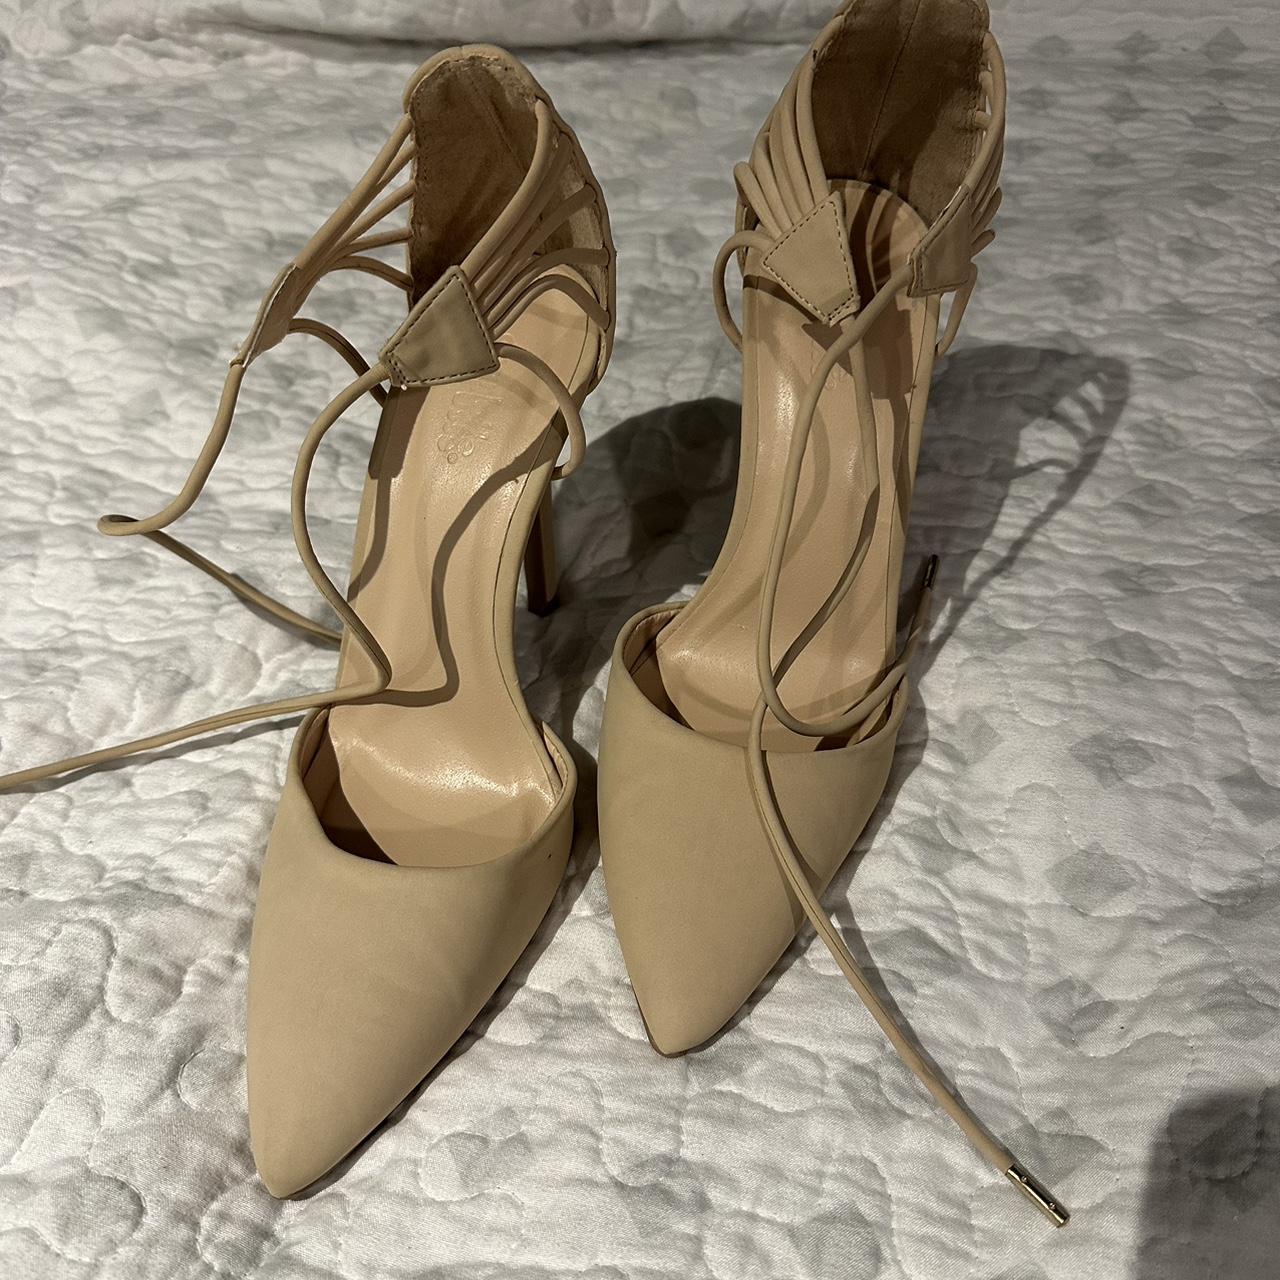 Nude lace up heels size 7 never worn - Depop